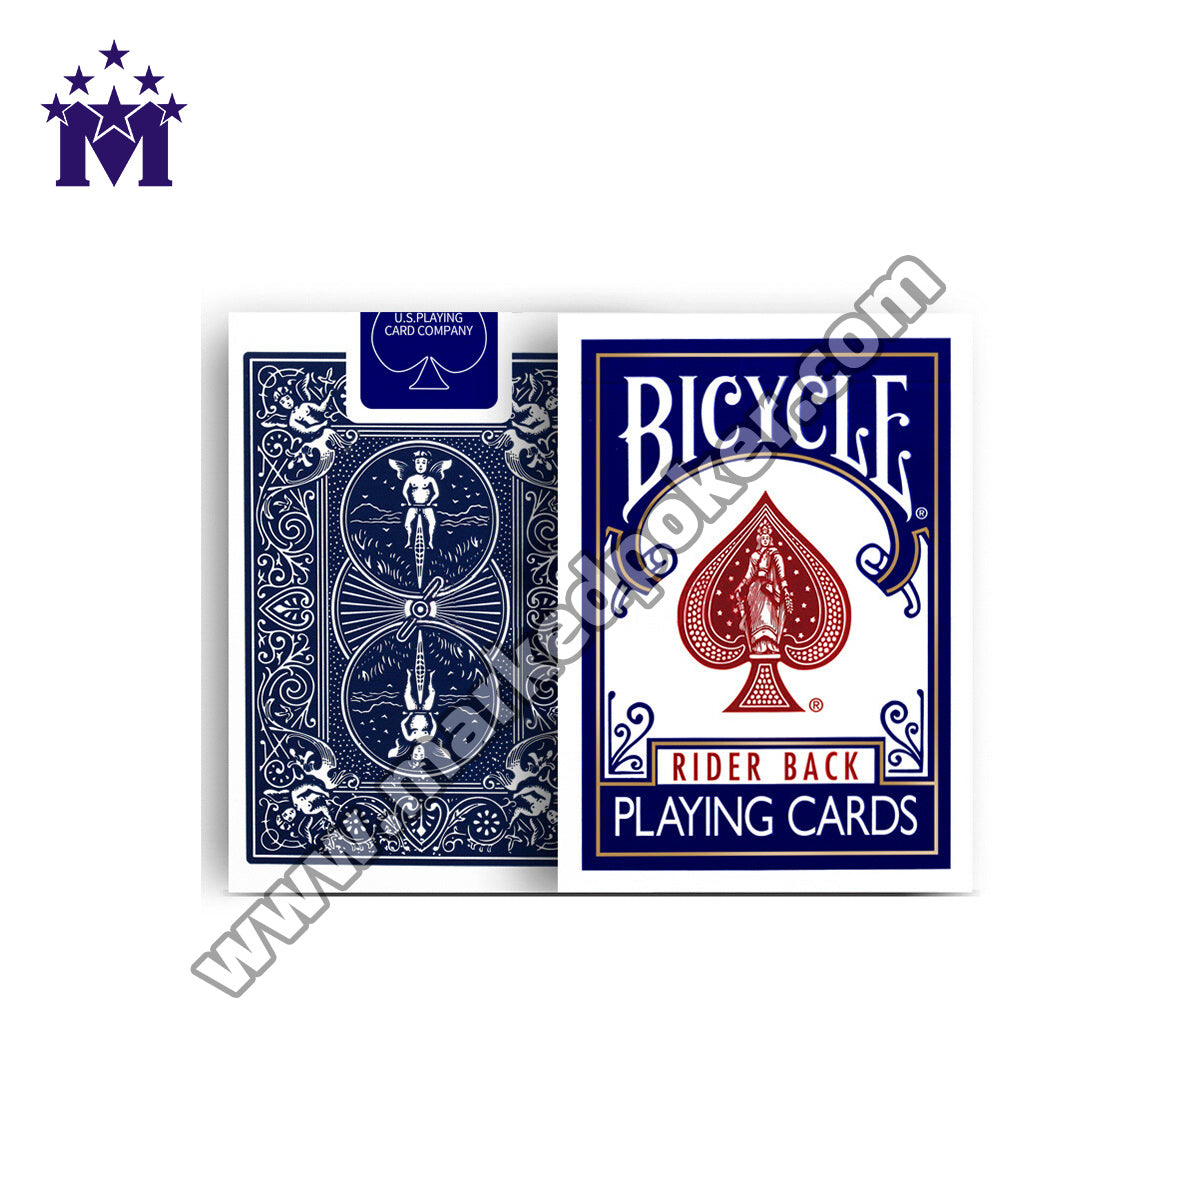 Bicycle Rider Back Infrared Contact Lenses Marked Poker Cards